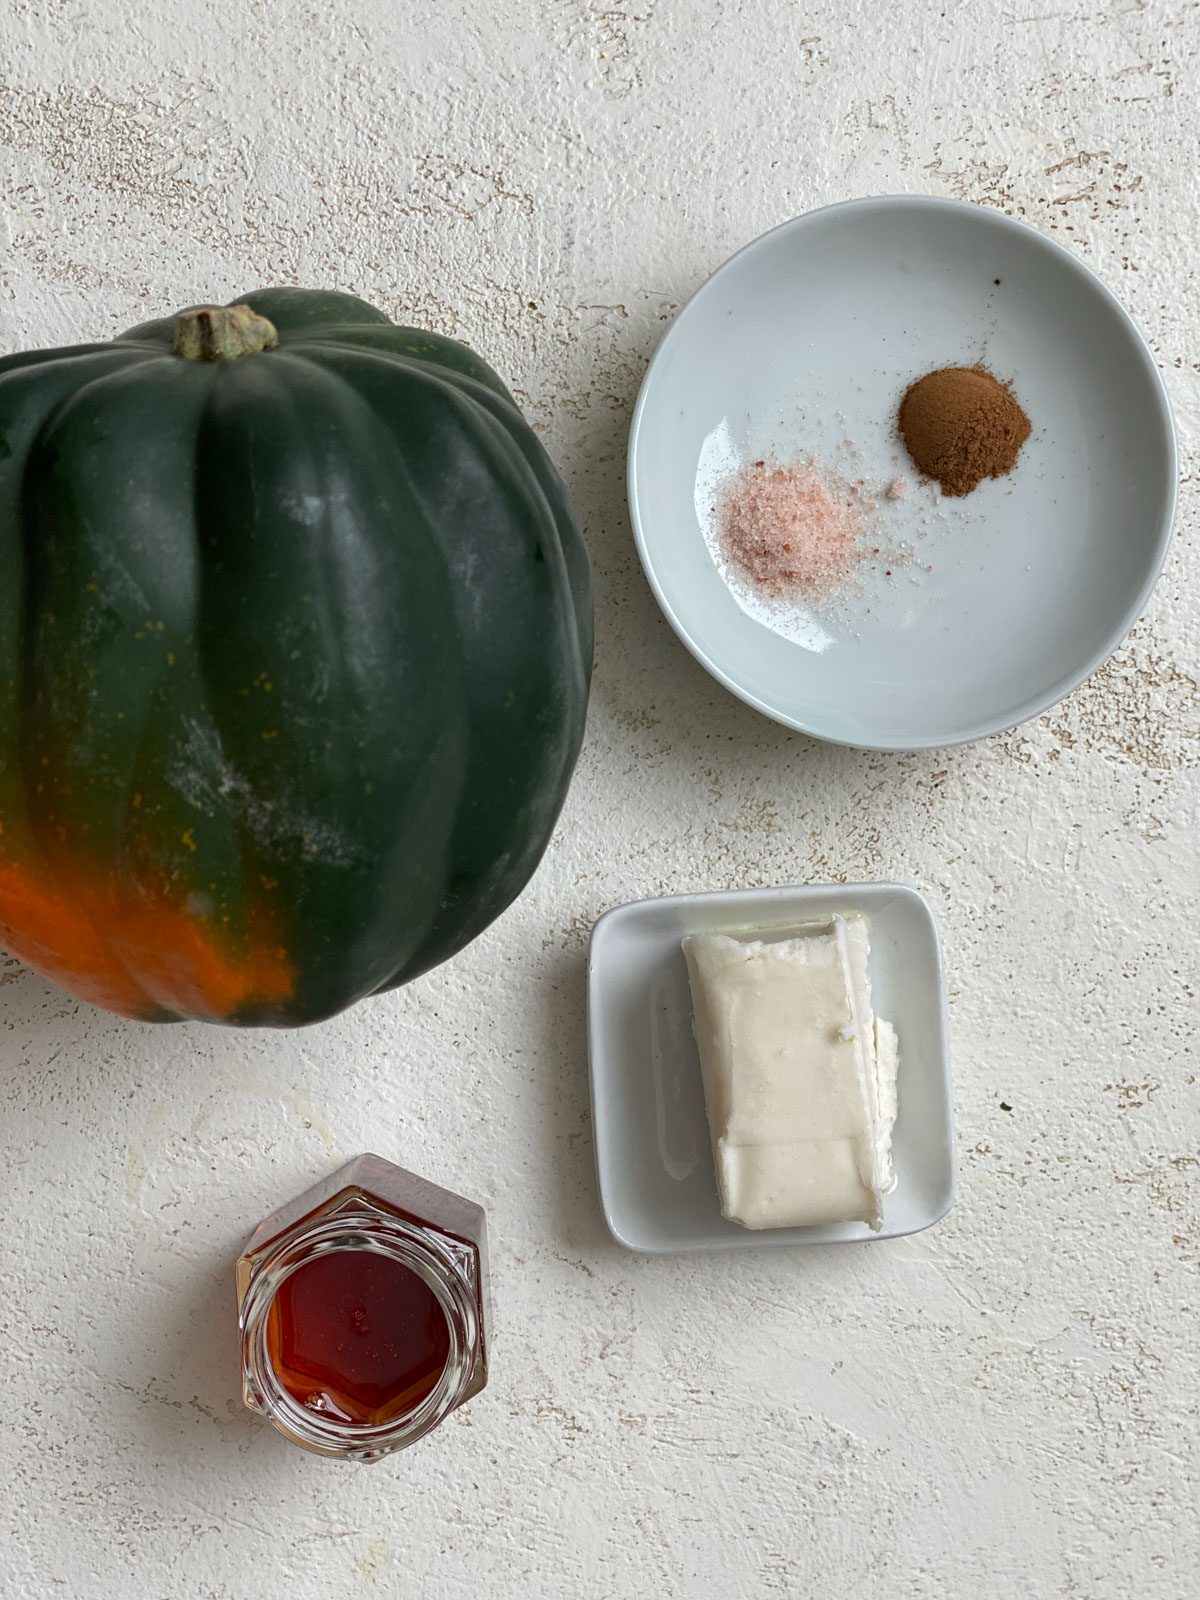 ingredients for Easy Air Fryer Acorn Squash measured out against a light surface